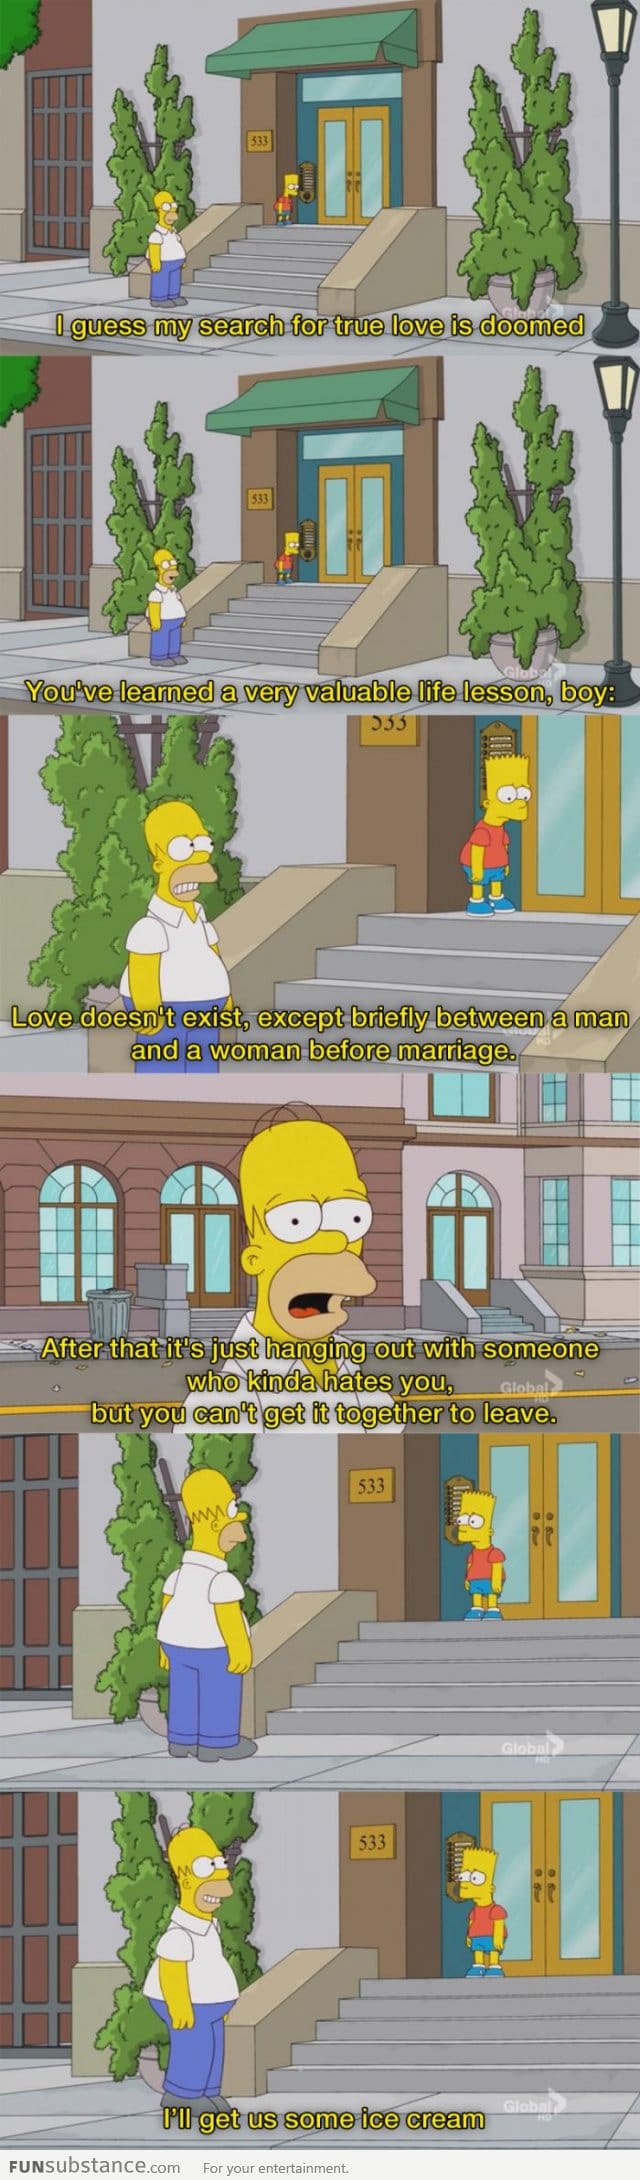 The Simpsons harsh truth